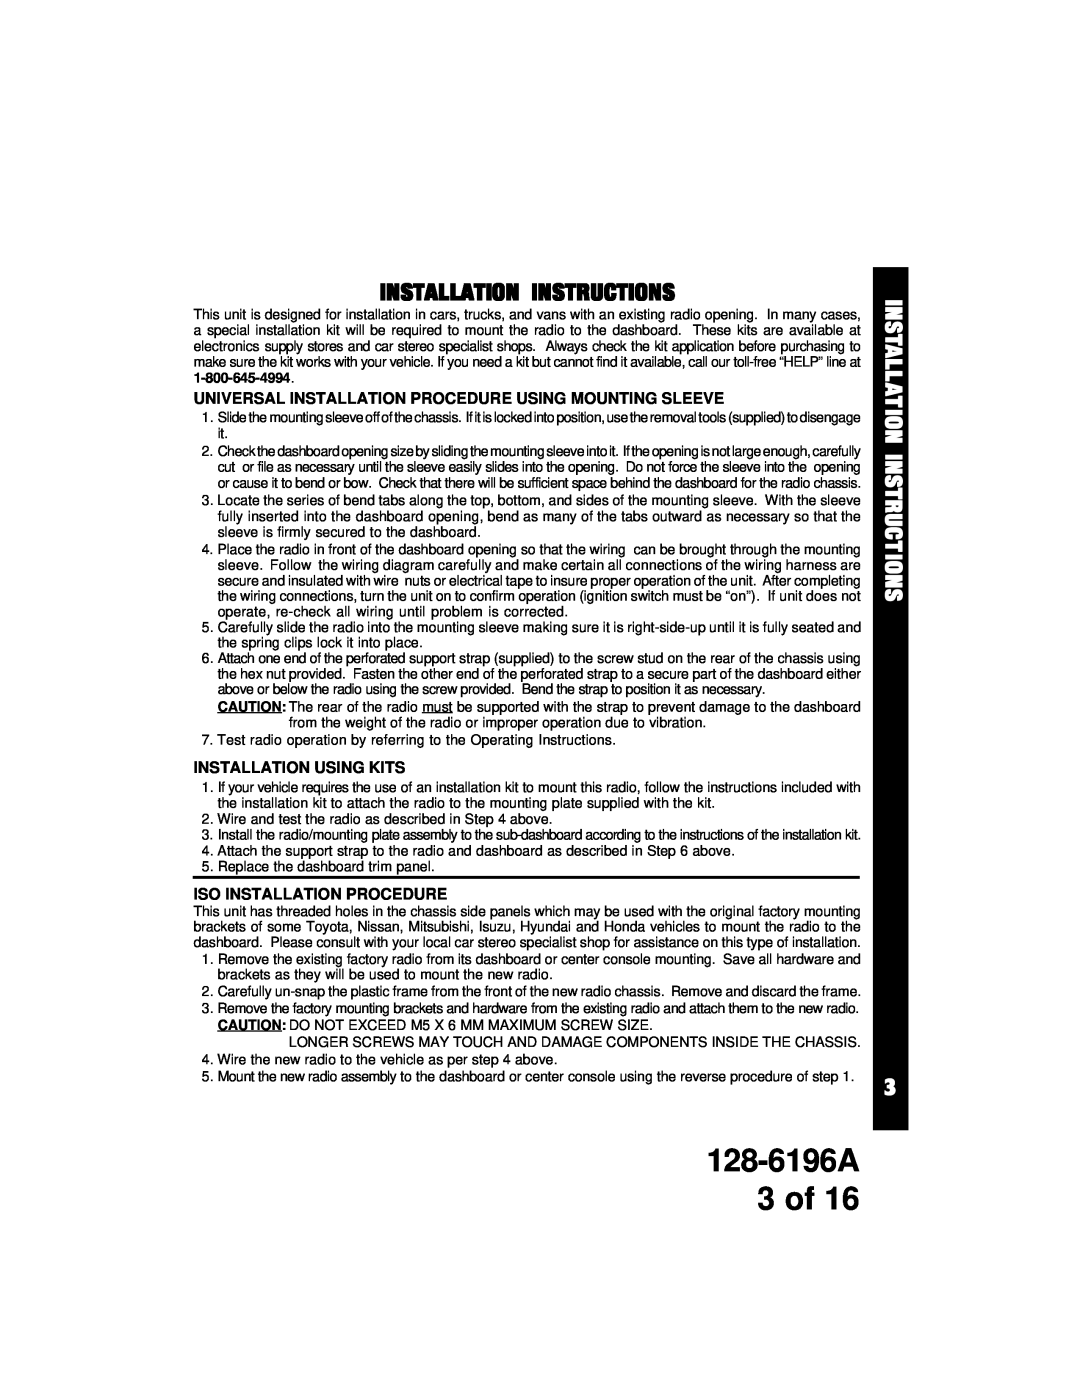 Audiovox ACD-12 owner manual 128-6196A 3 of, Installation Instructions, Installation Using Kits, Iso Installation Procedure 